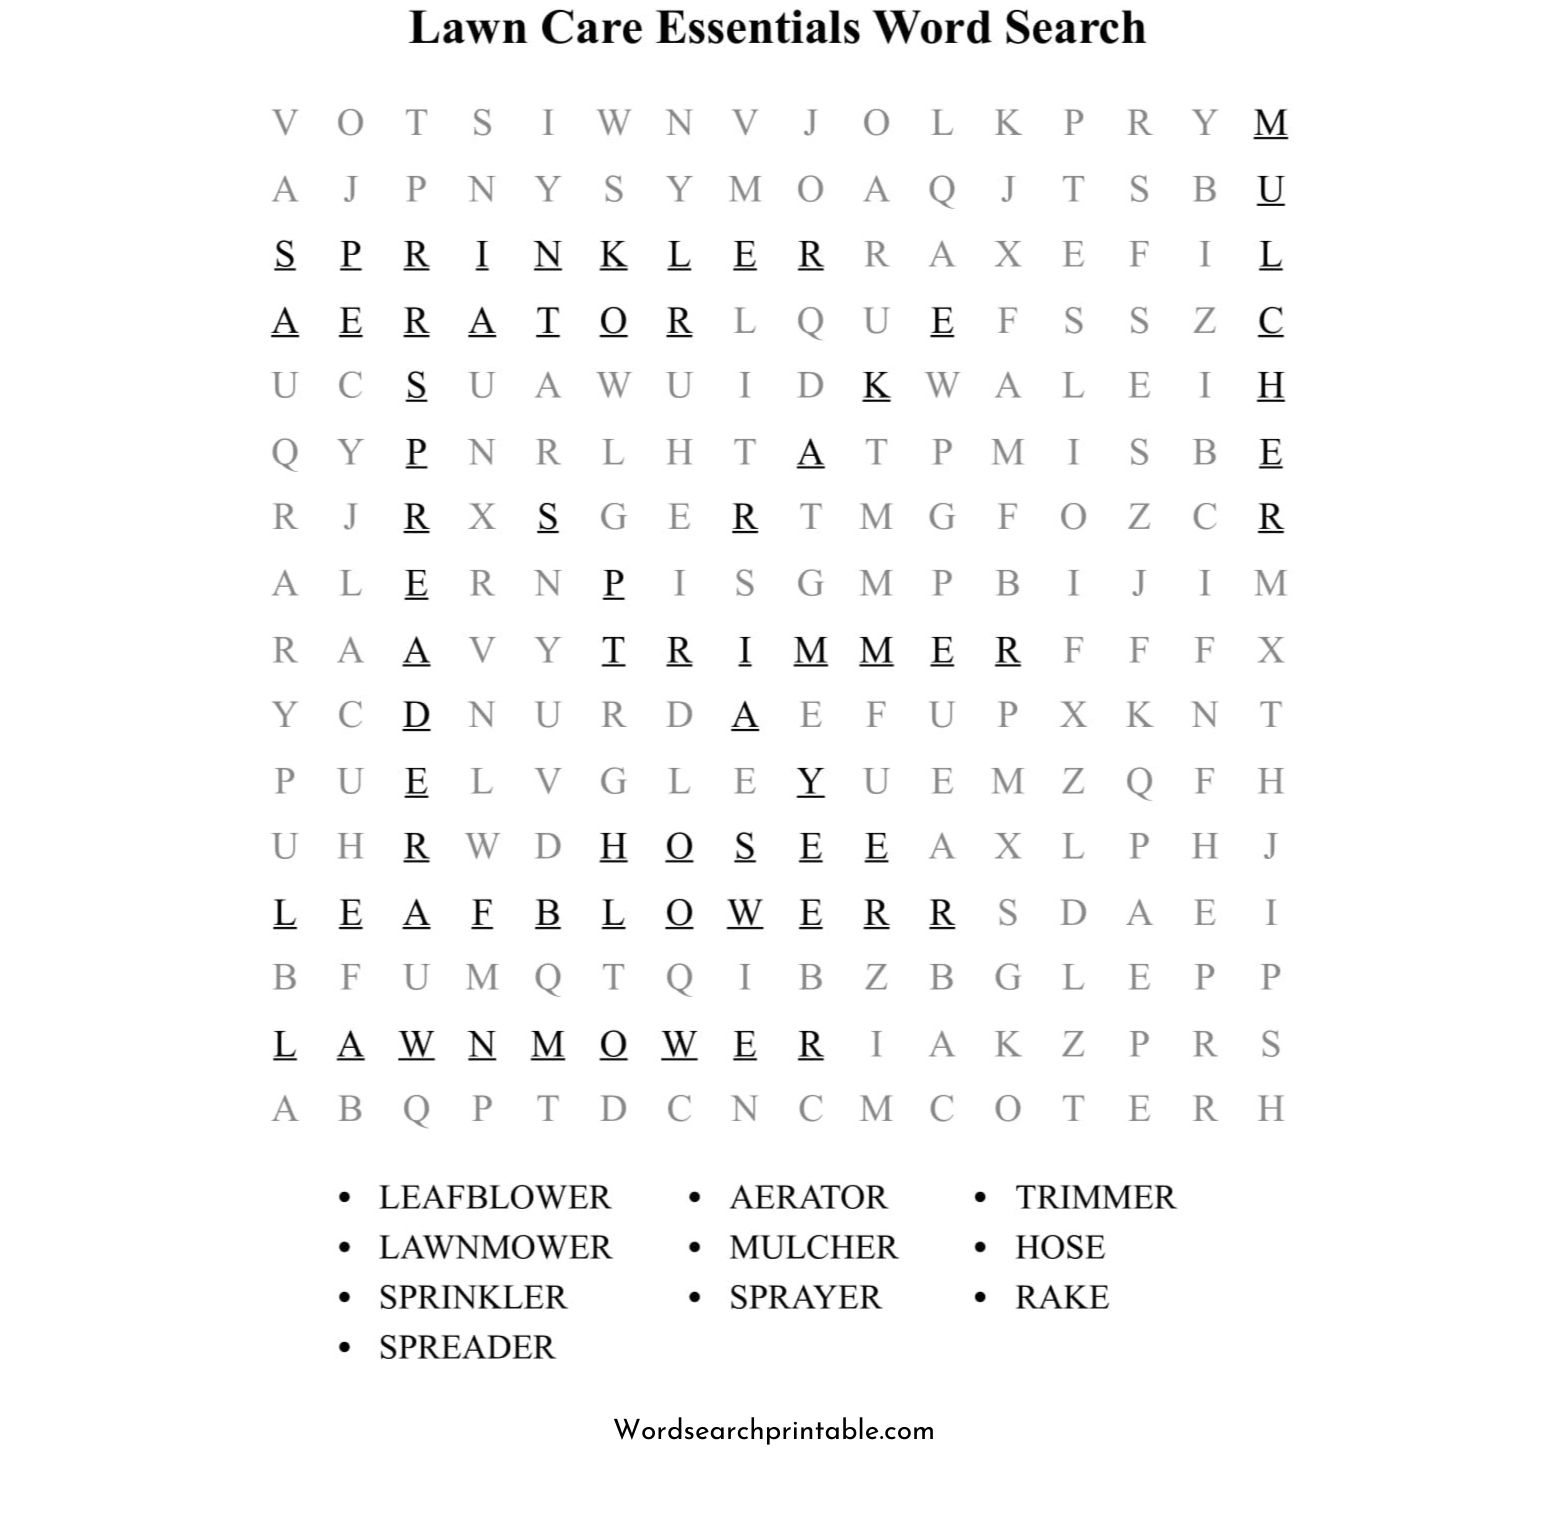 lawn care essentials word search puzzle solution